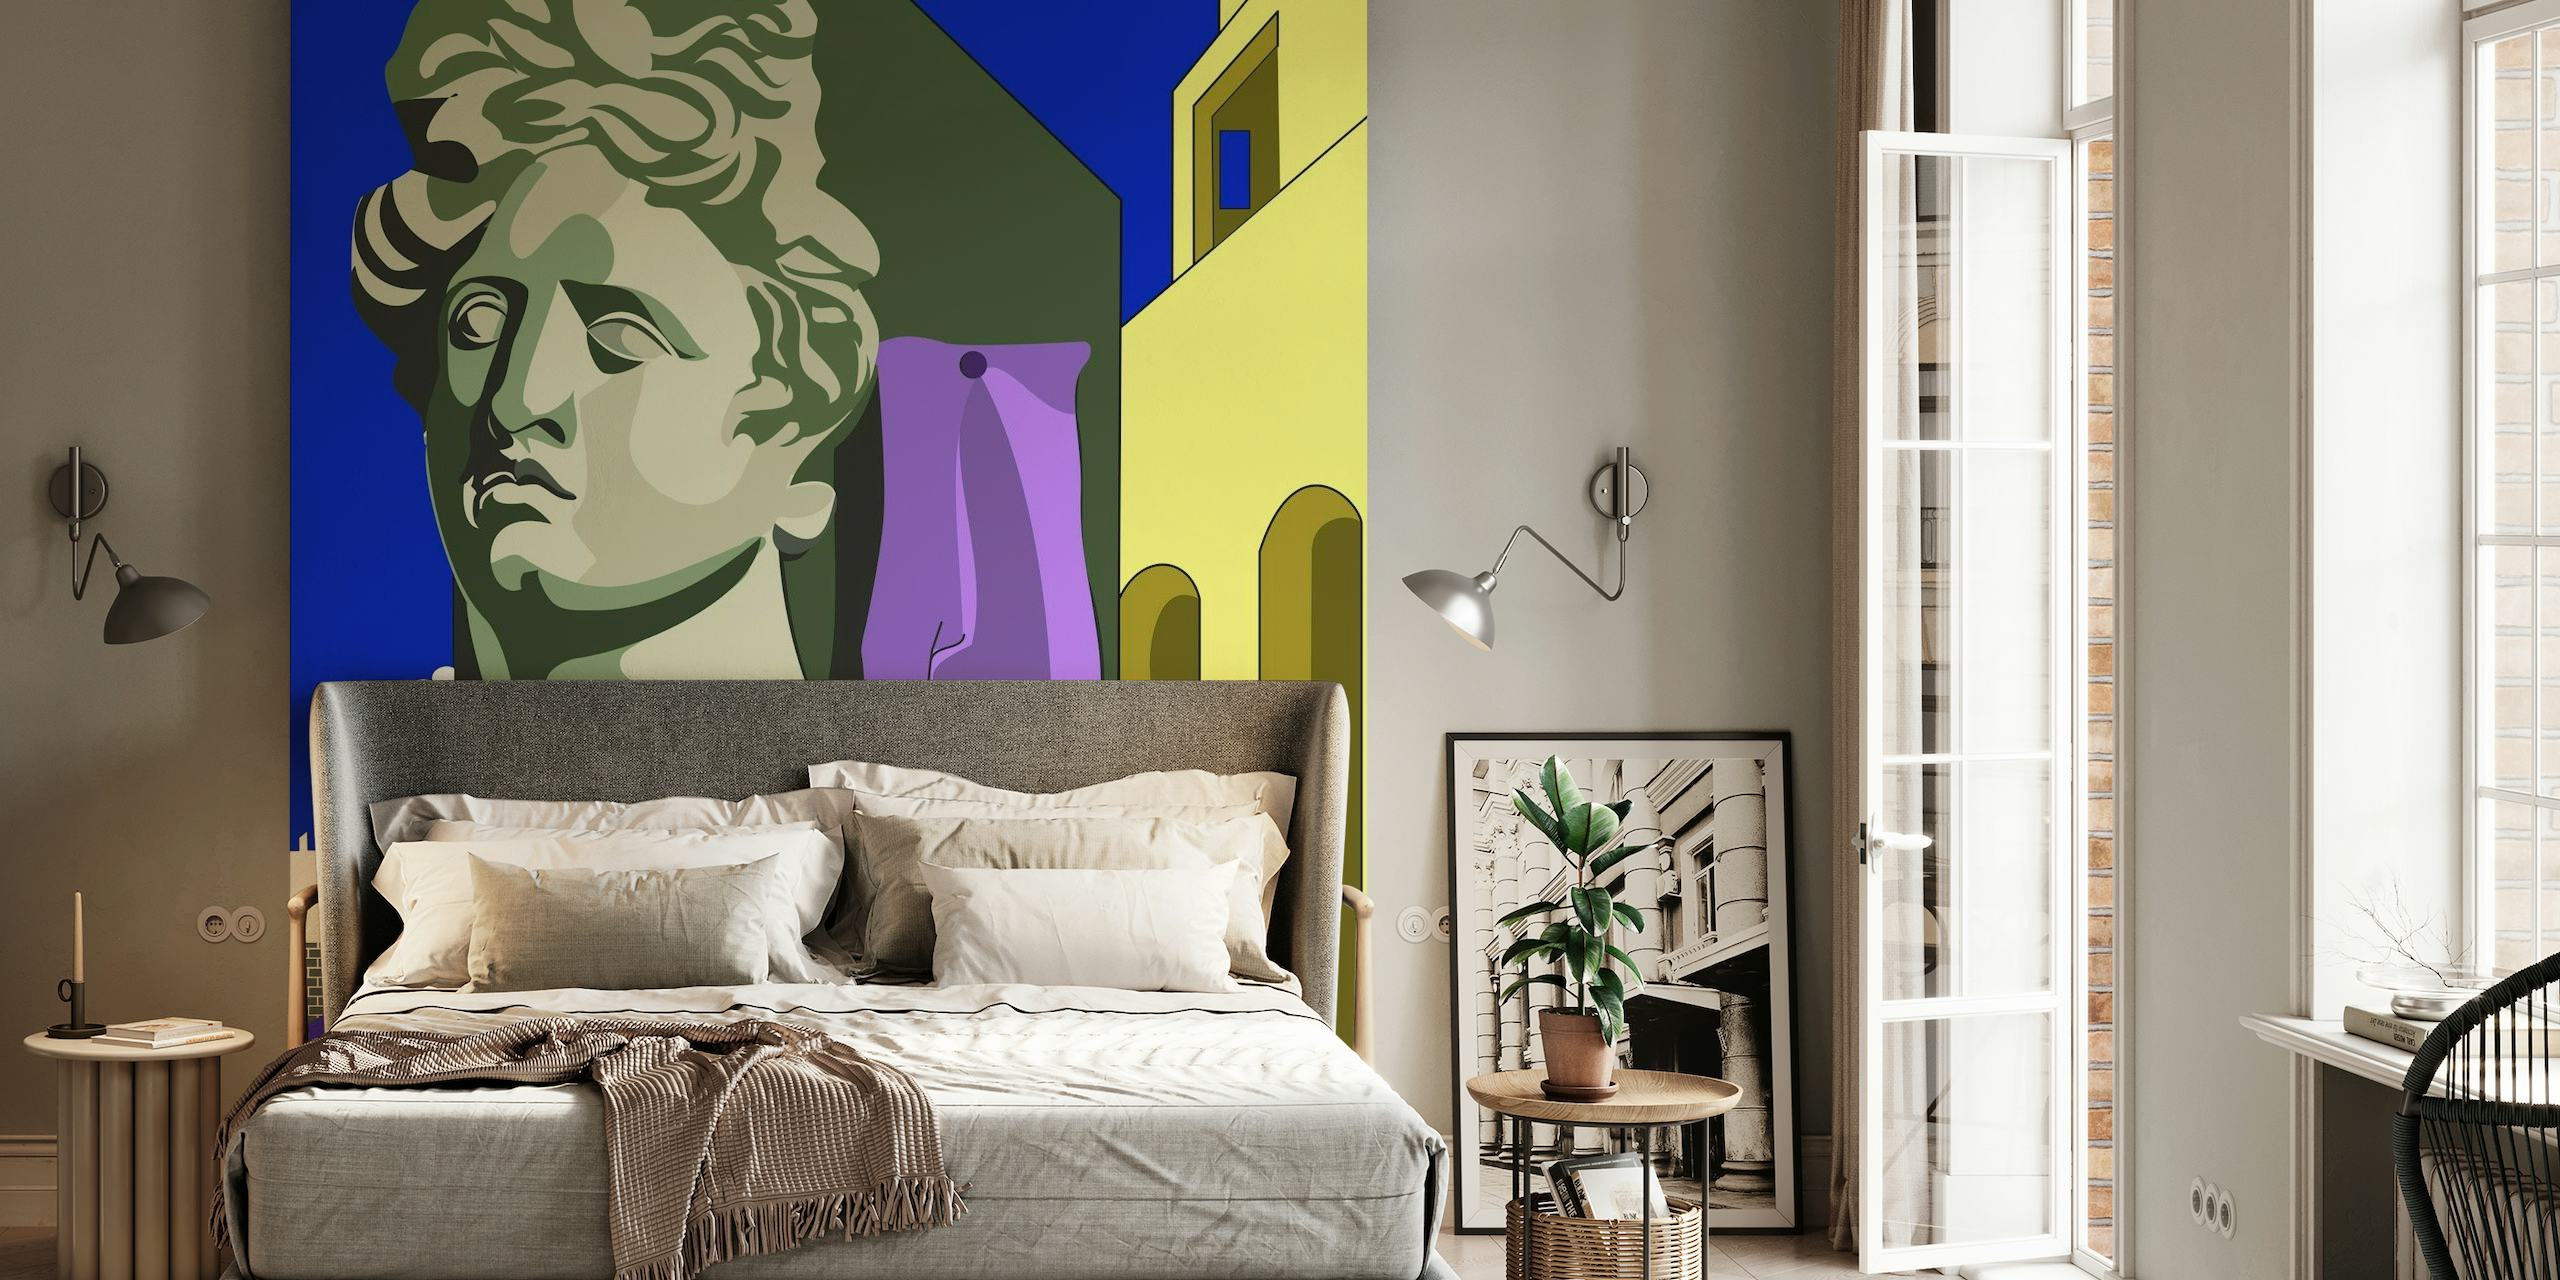 Stylized classical bust amid abstract shapes wall mural